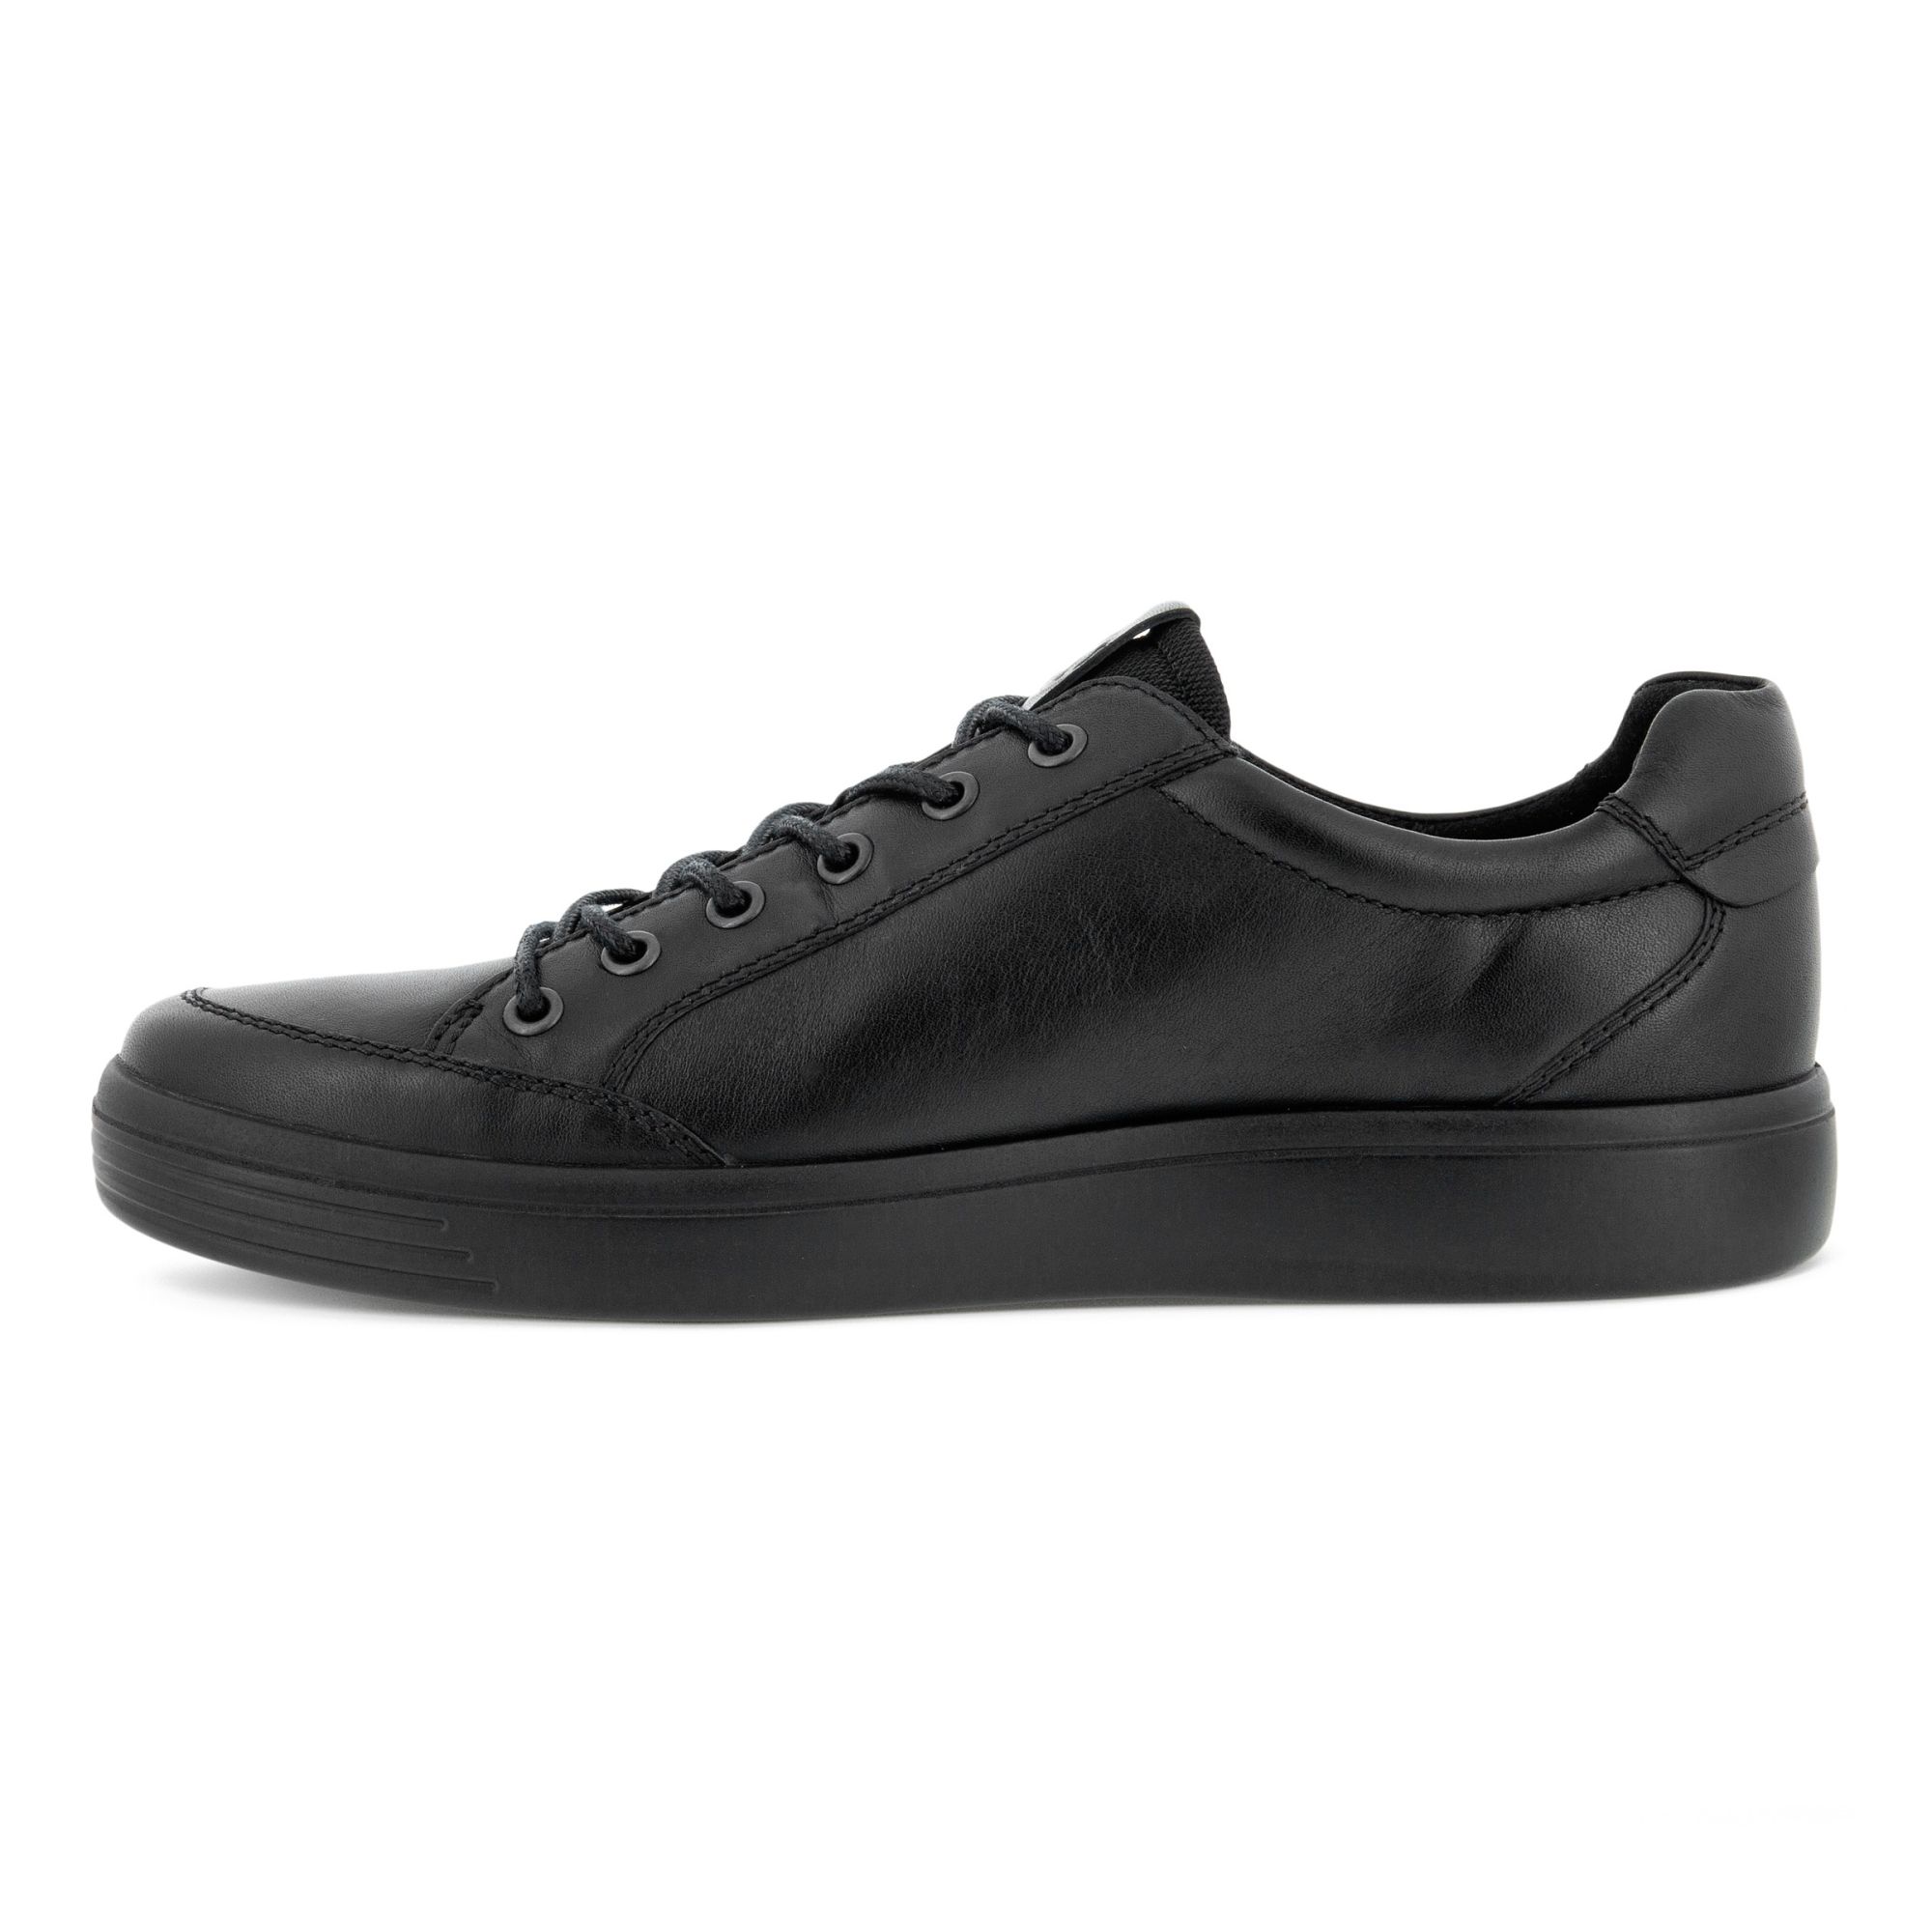 Ecco Soft Cl M Sneaker LEA 44 - Products - Veryk Mall - Veryk Mall